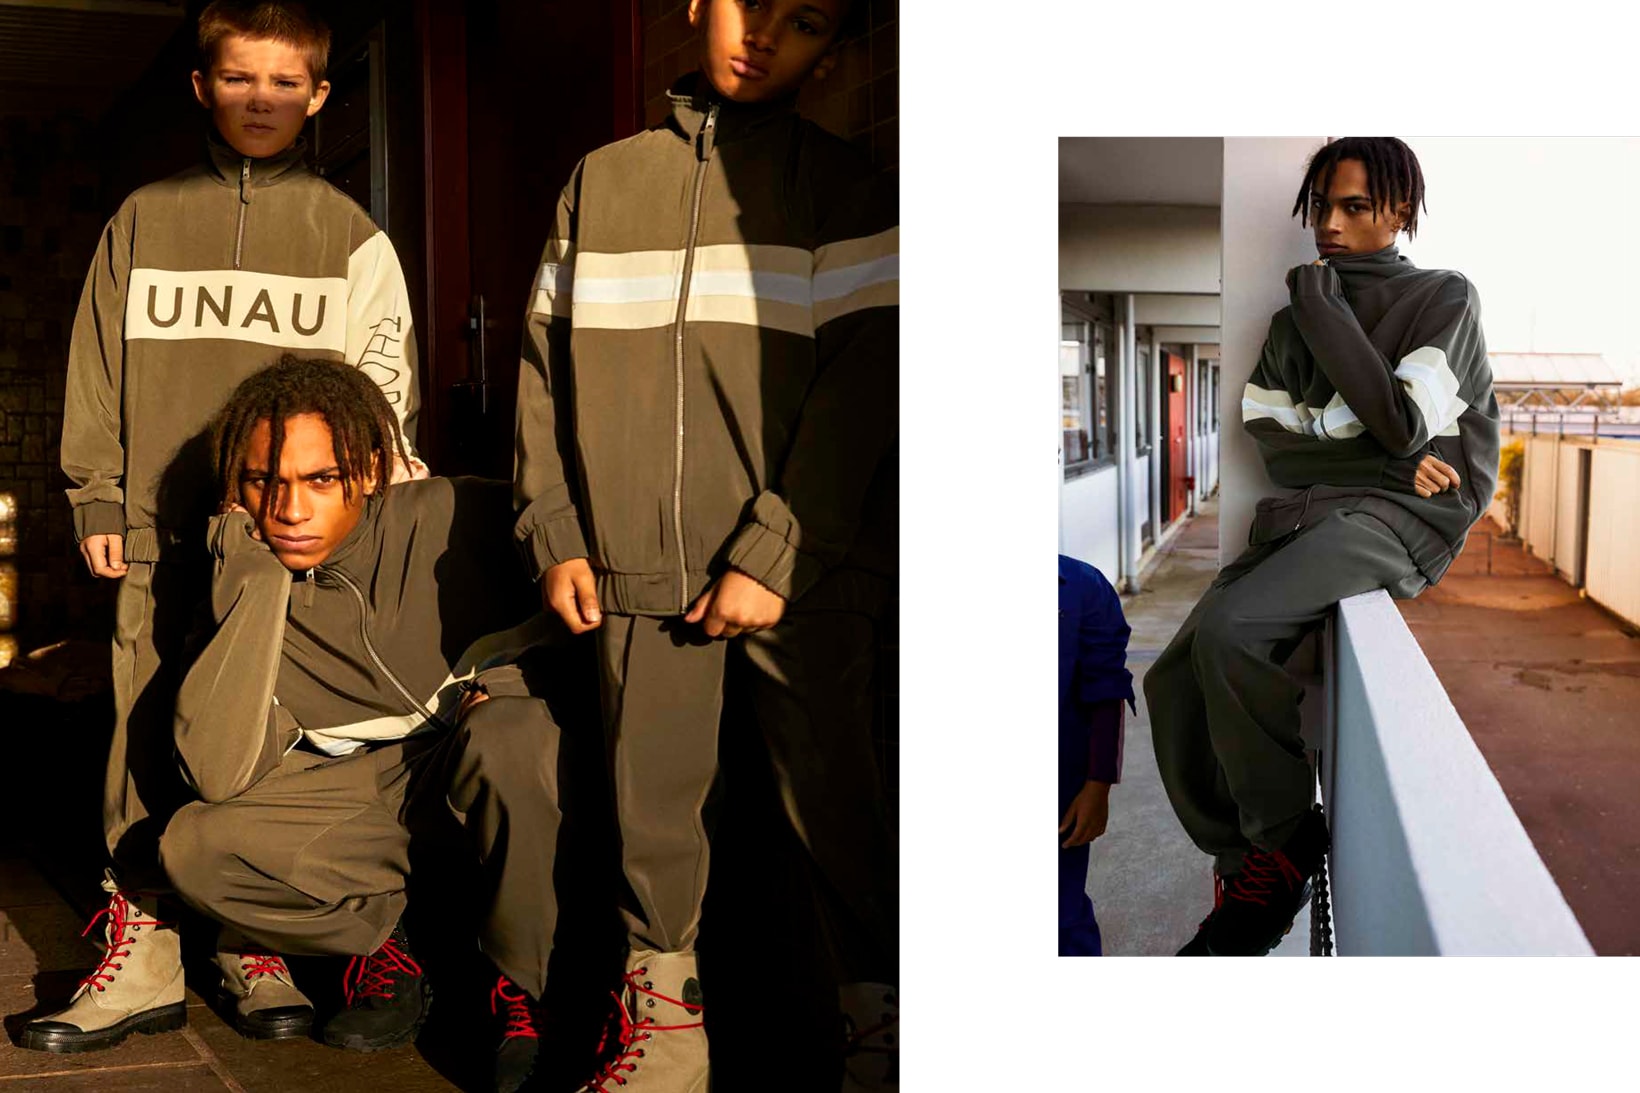 Unauthorized 2018 Fall Winter Collection Lookbook Denmark Father Son Athleisure sweatpants tracksuit